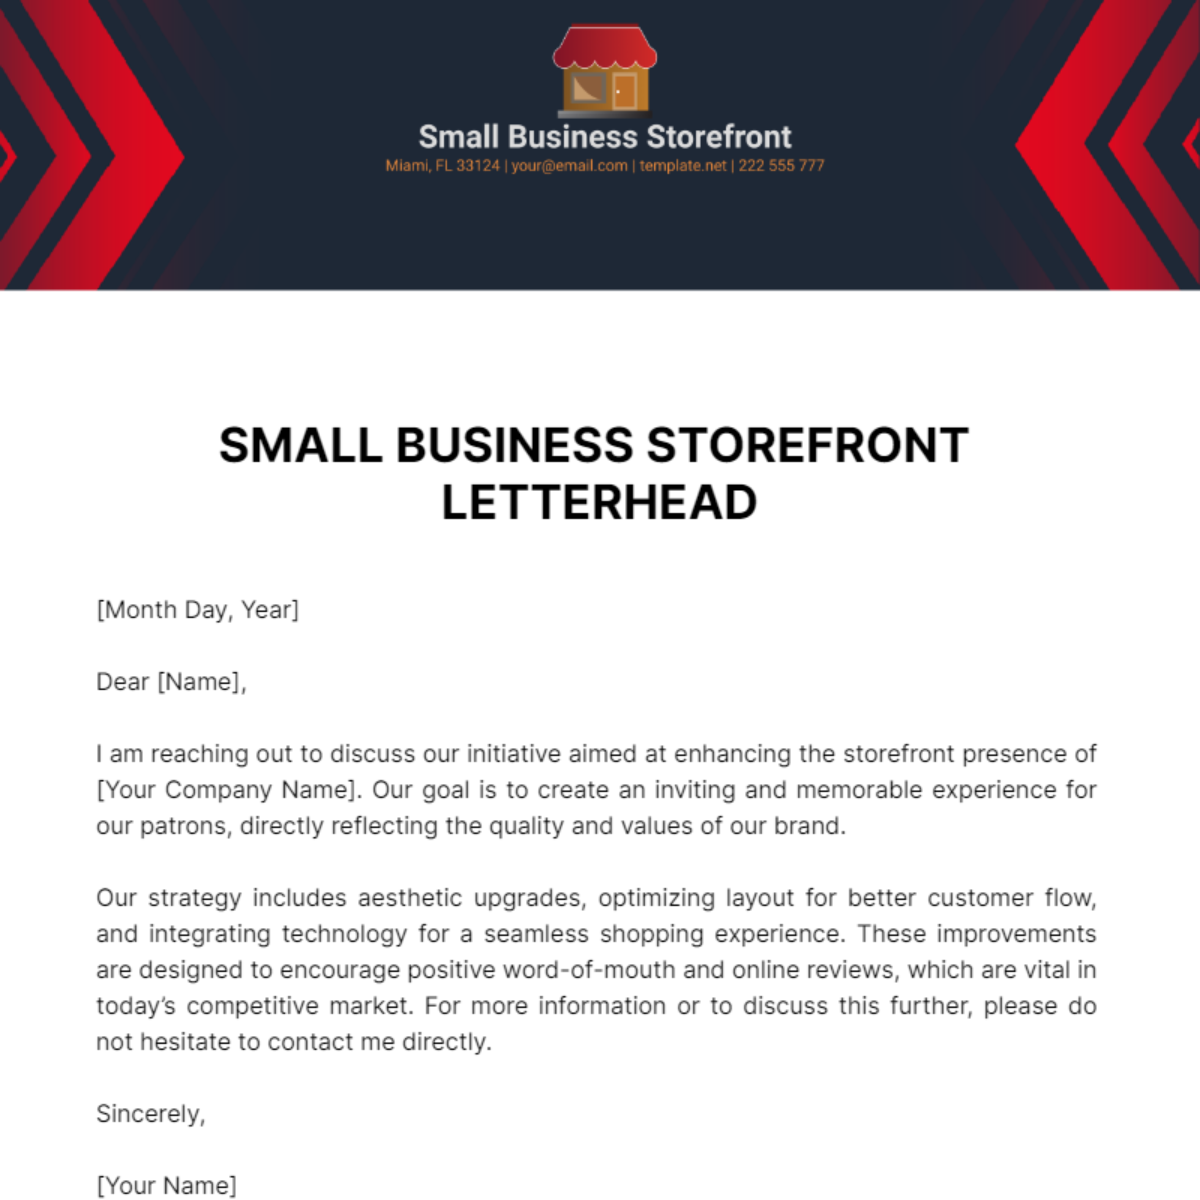 Small Business Storefront Letterhead Template